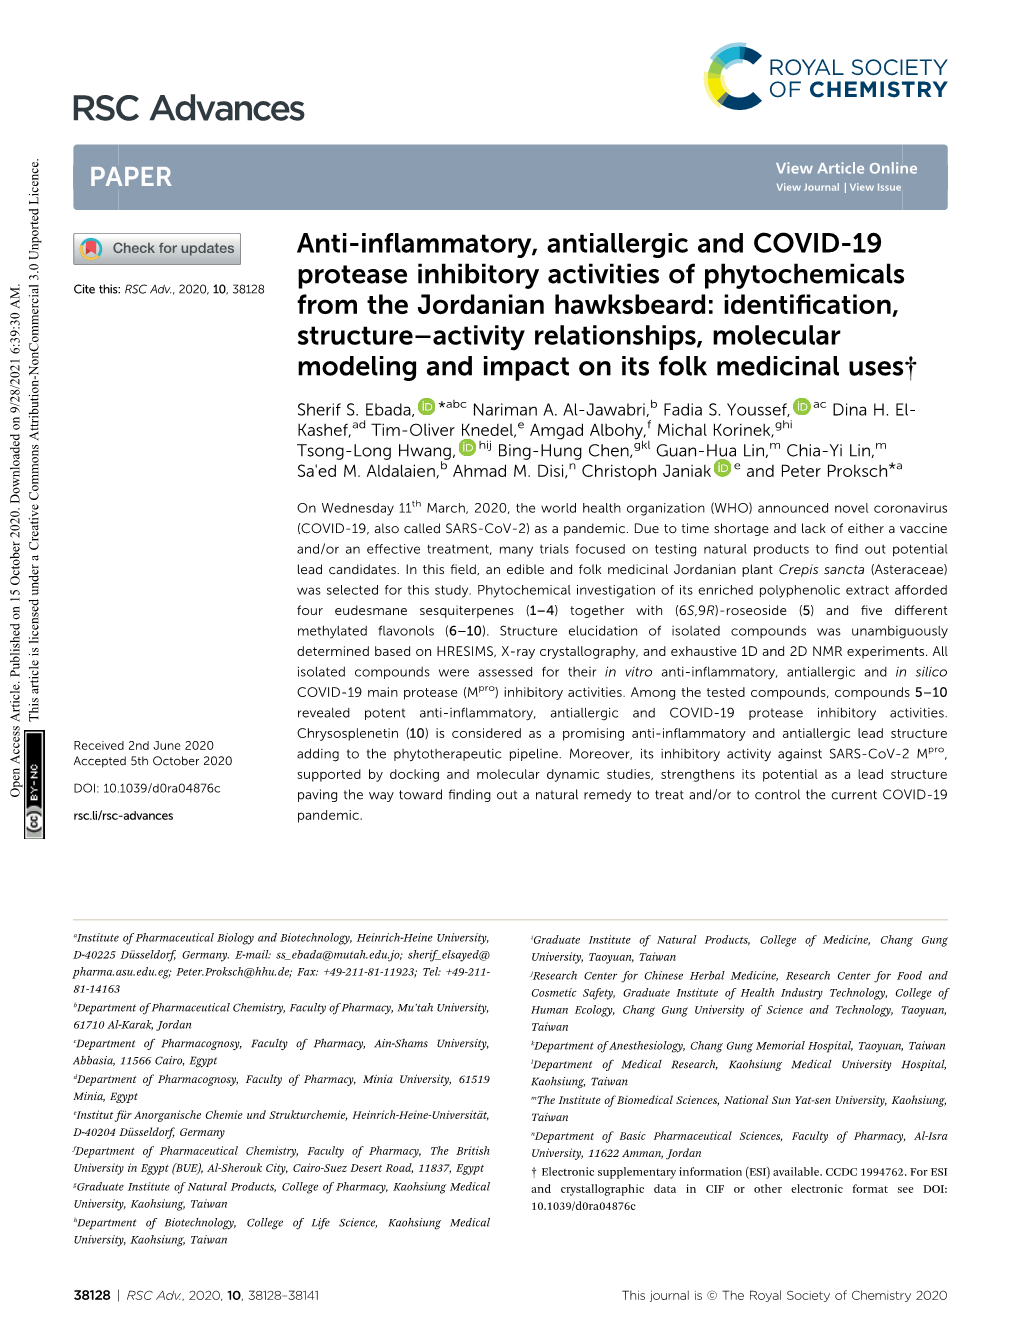 Anti-Inflammatory, Antiallergic and COVID-19 Protease Inhibitory